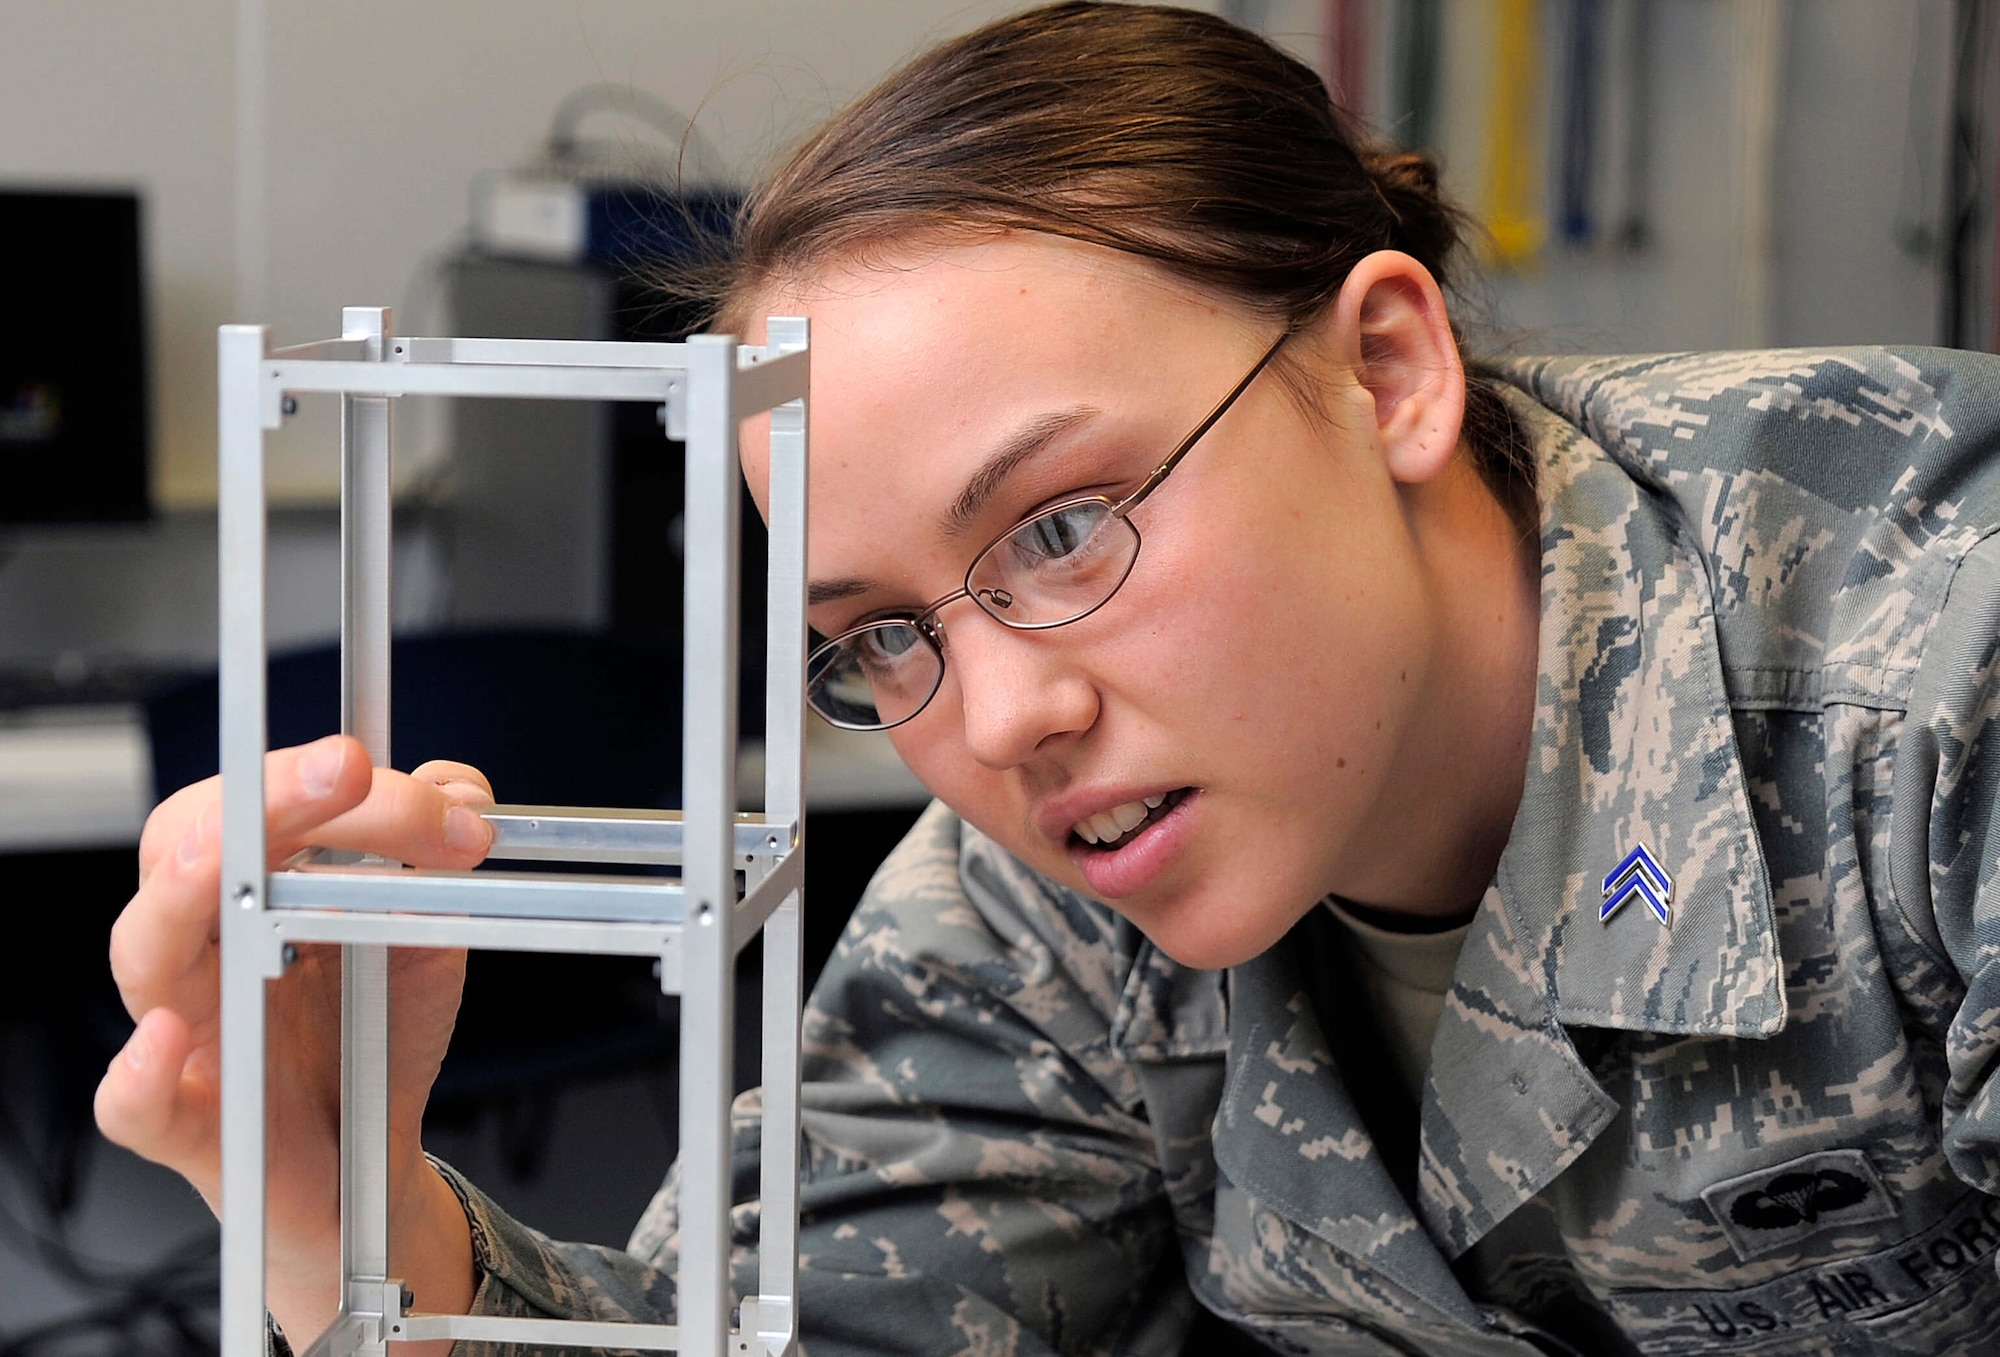 An Air Force Academy cadet works on an engineering project. The Academy has a large number of research relationships with the Air Force Research Laboratory, the Defense Advanced Research Projects Agency and industry leaders that exposes cadets to real-world technical problems.